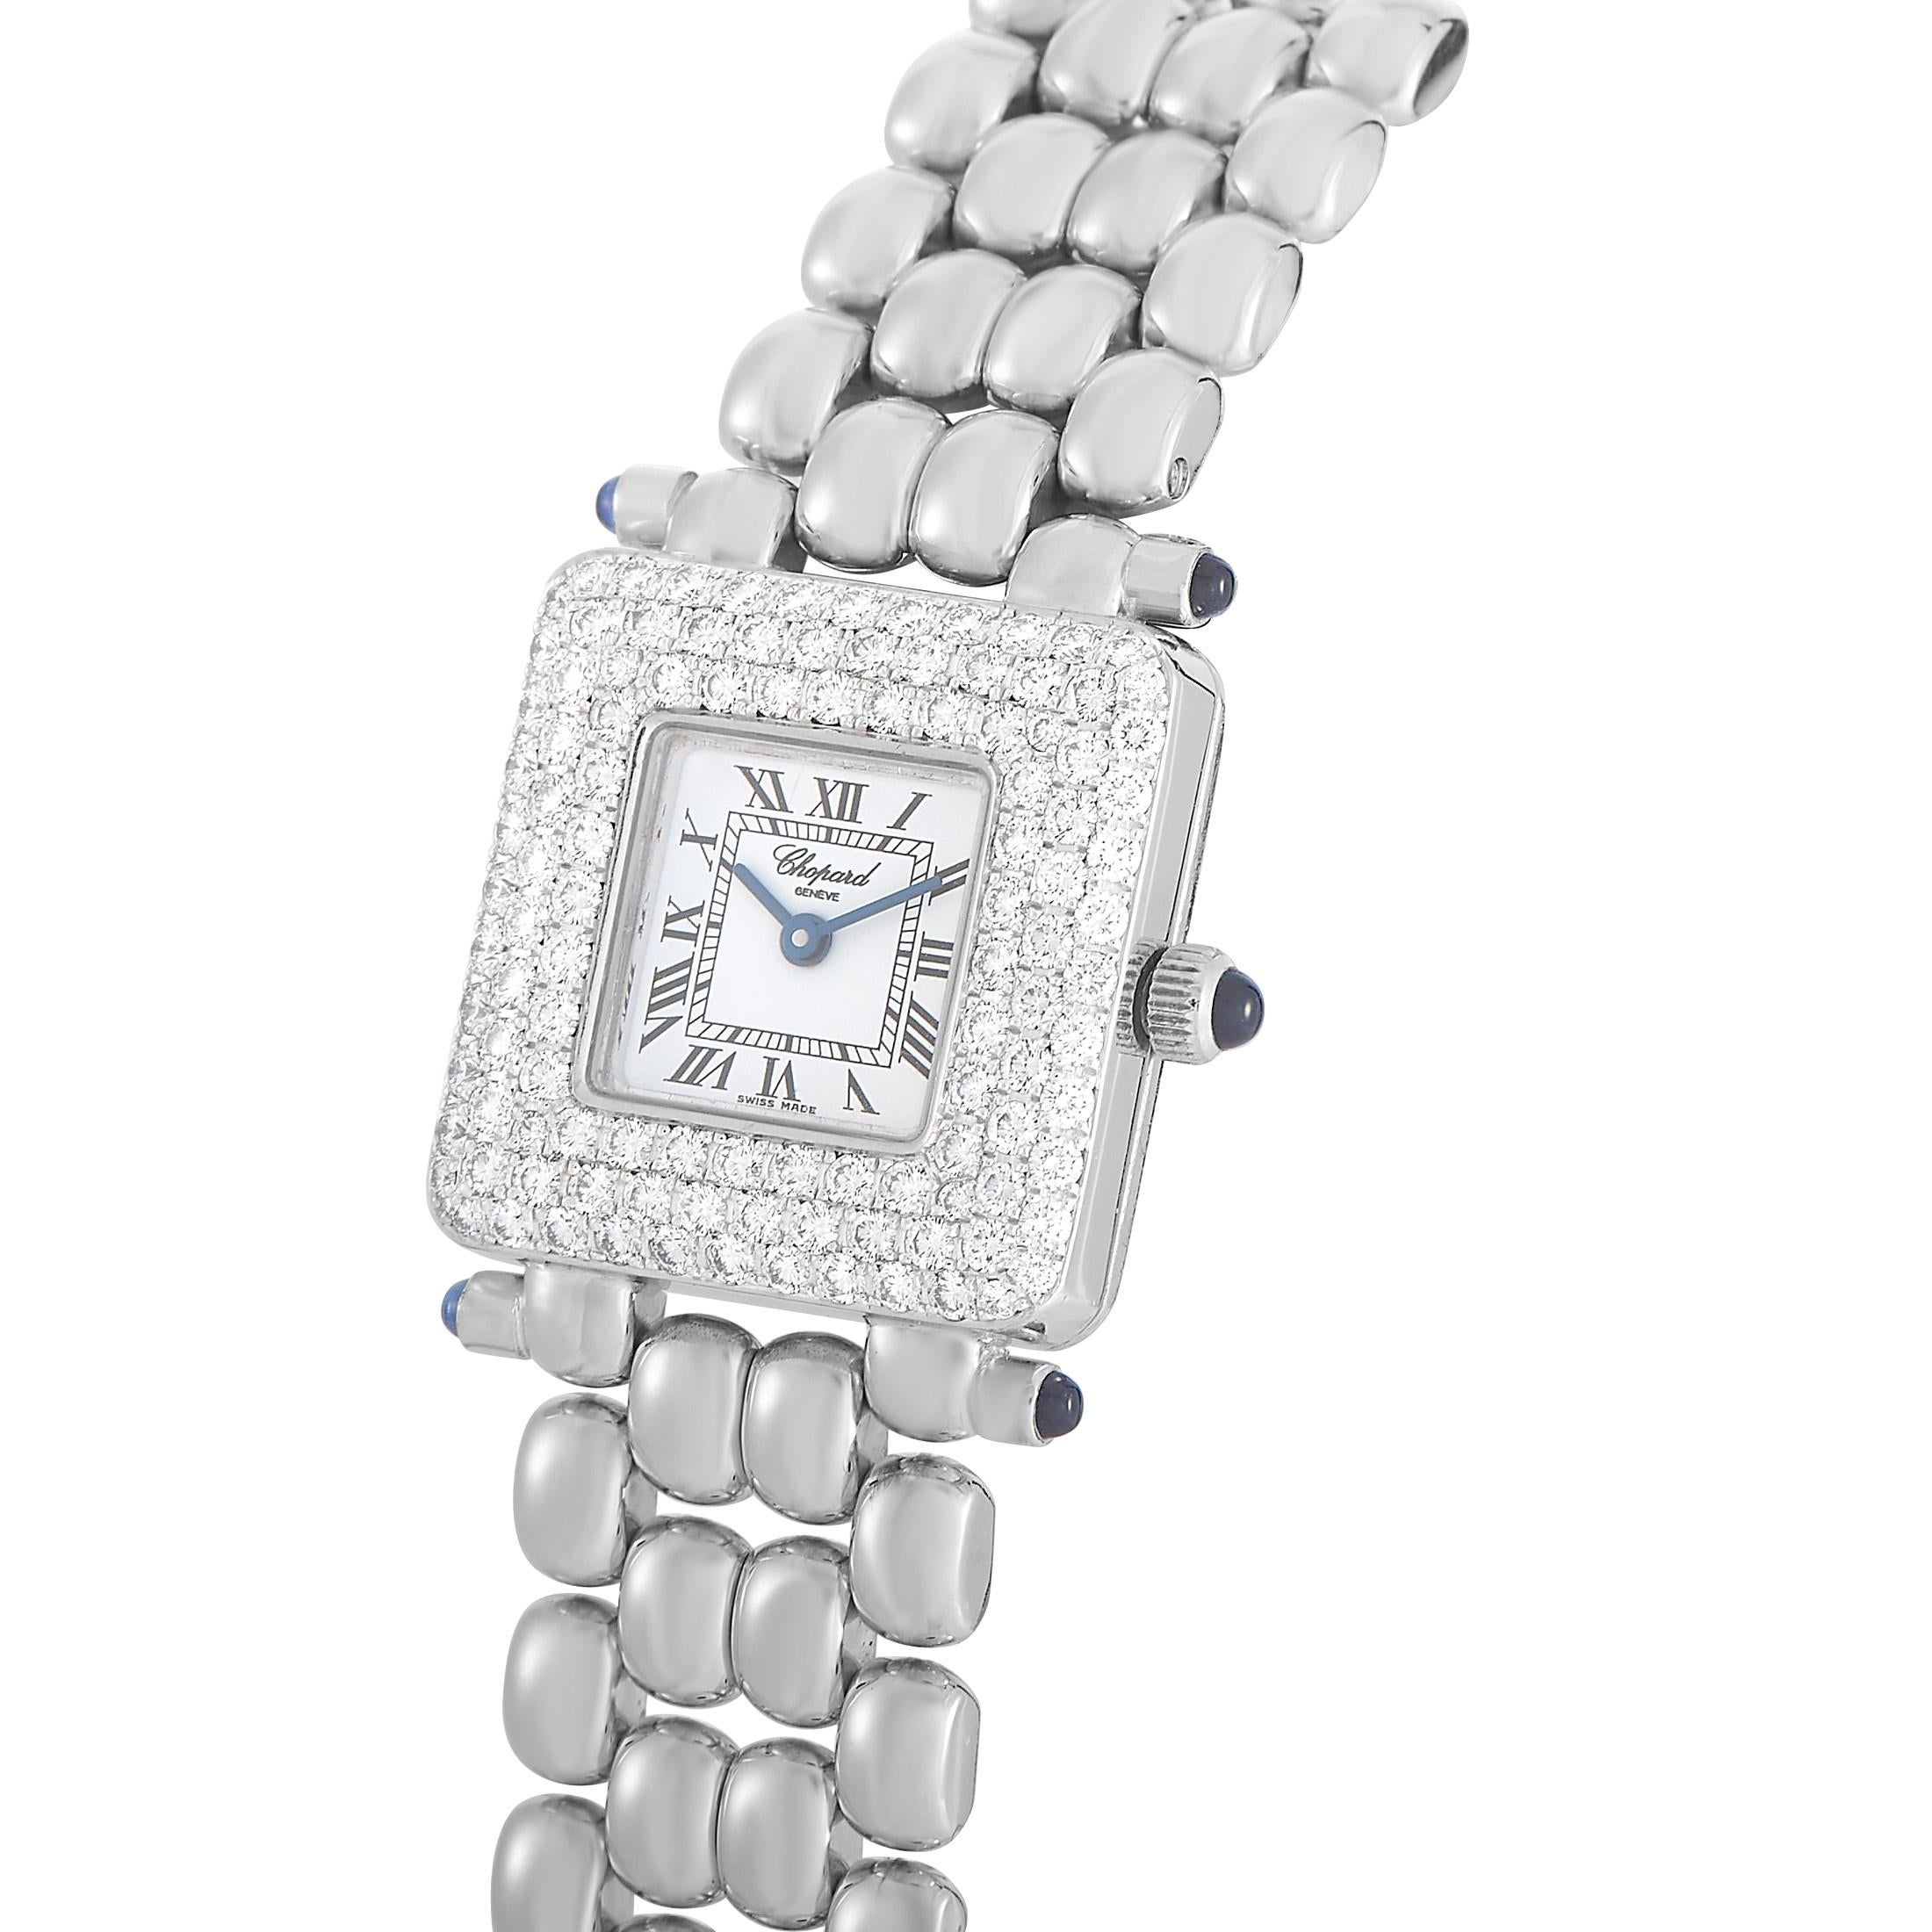 The Chopard Classic Diamond Watch, reference number 106115-23, is a chic timepiece that is at the pinnacle of luxury. 

This watch’s 28mm square case is crafted from 18K White Gold and adorned with rows of glittering diamonds. On the dainty white